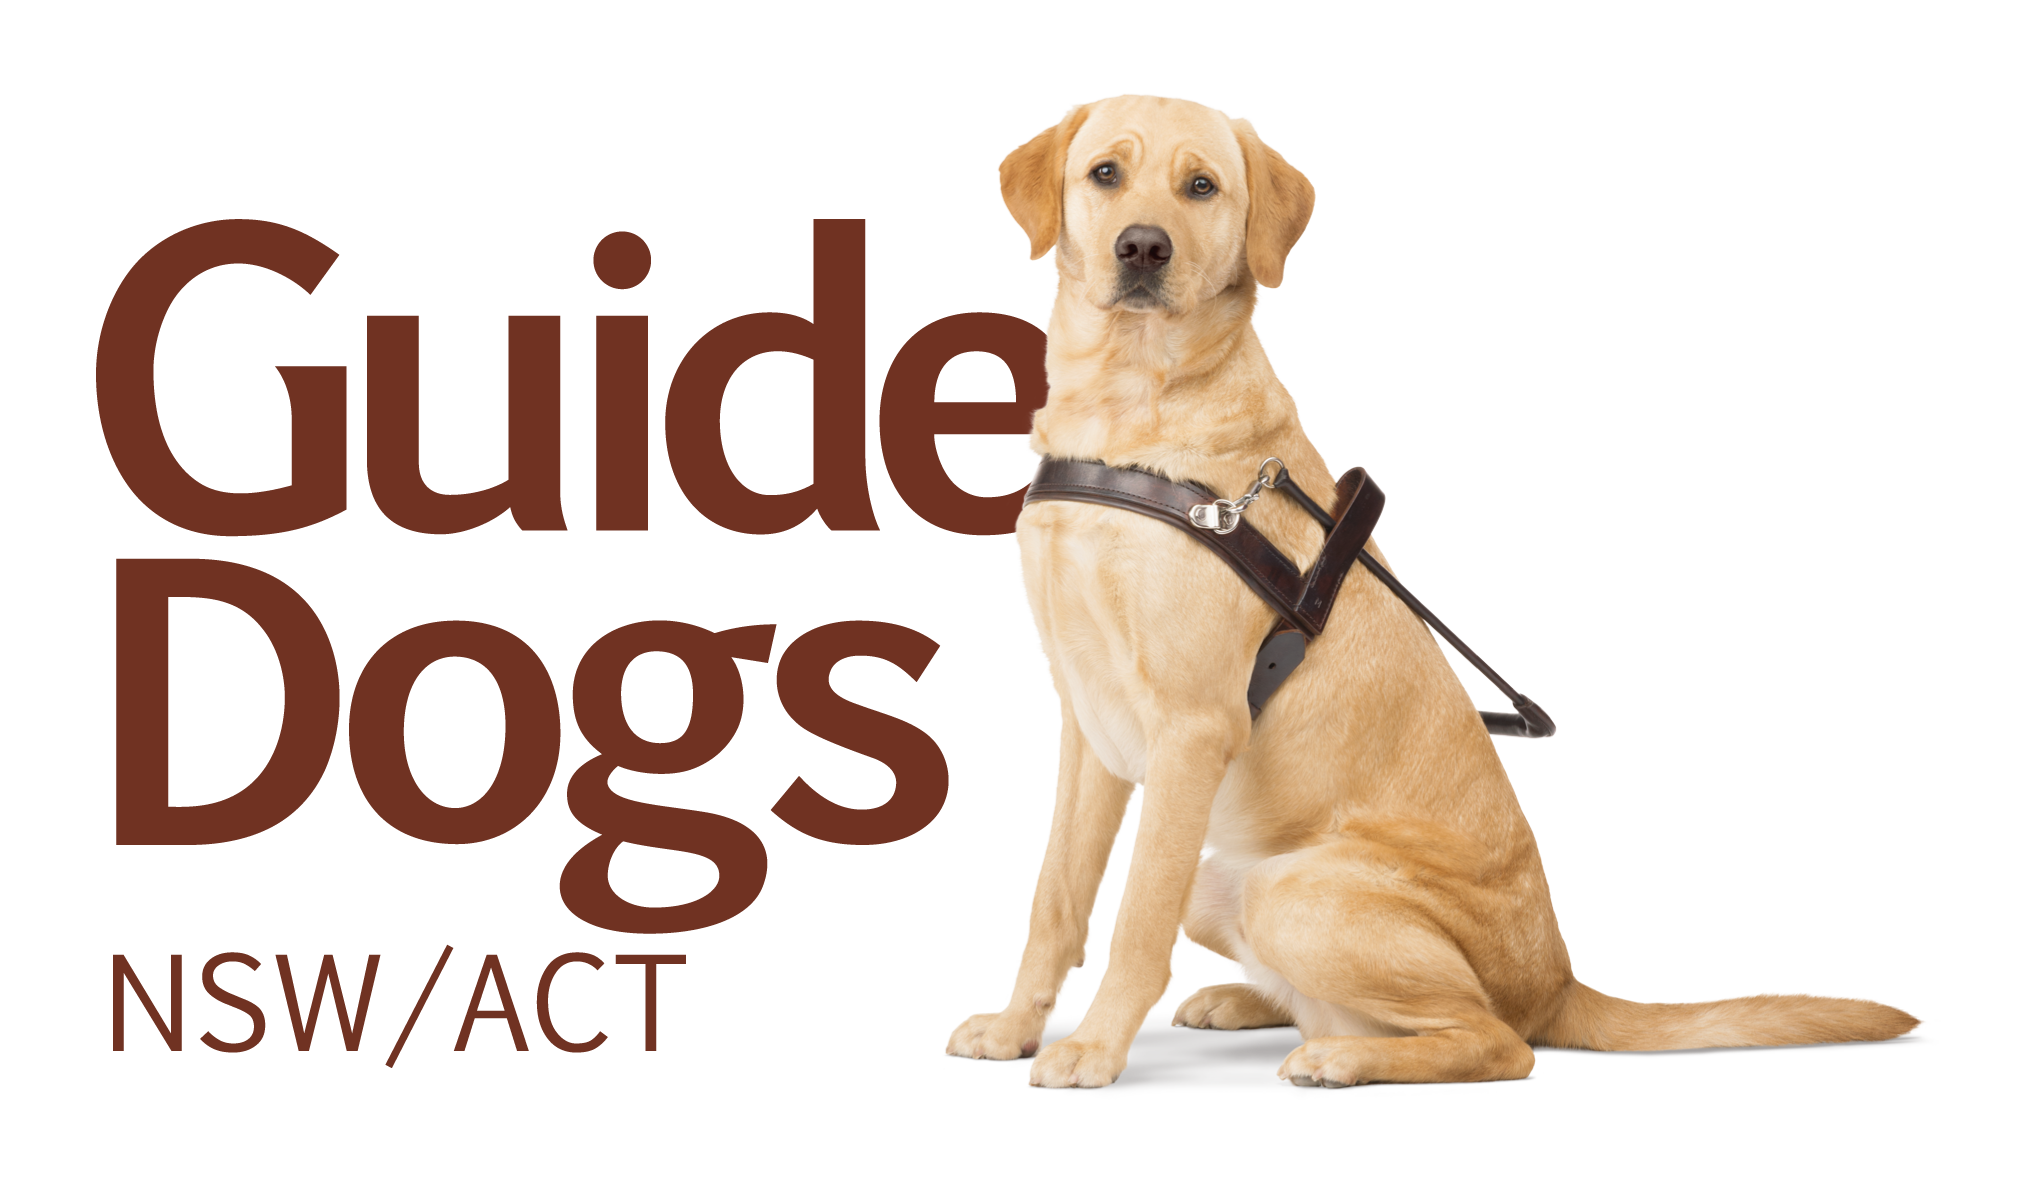 Guide Dogs NSW Day Tour Image -5a0bc8c682ccc